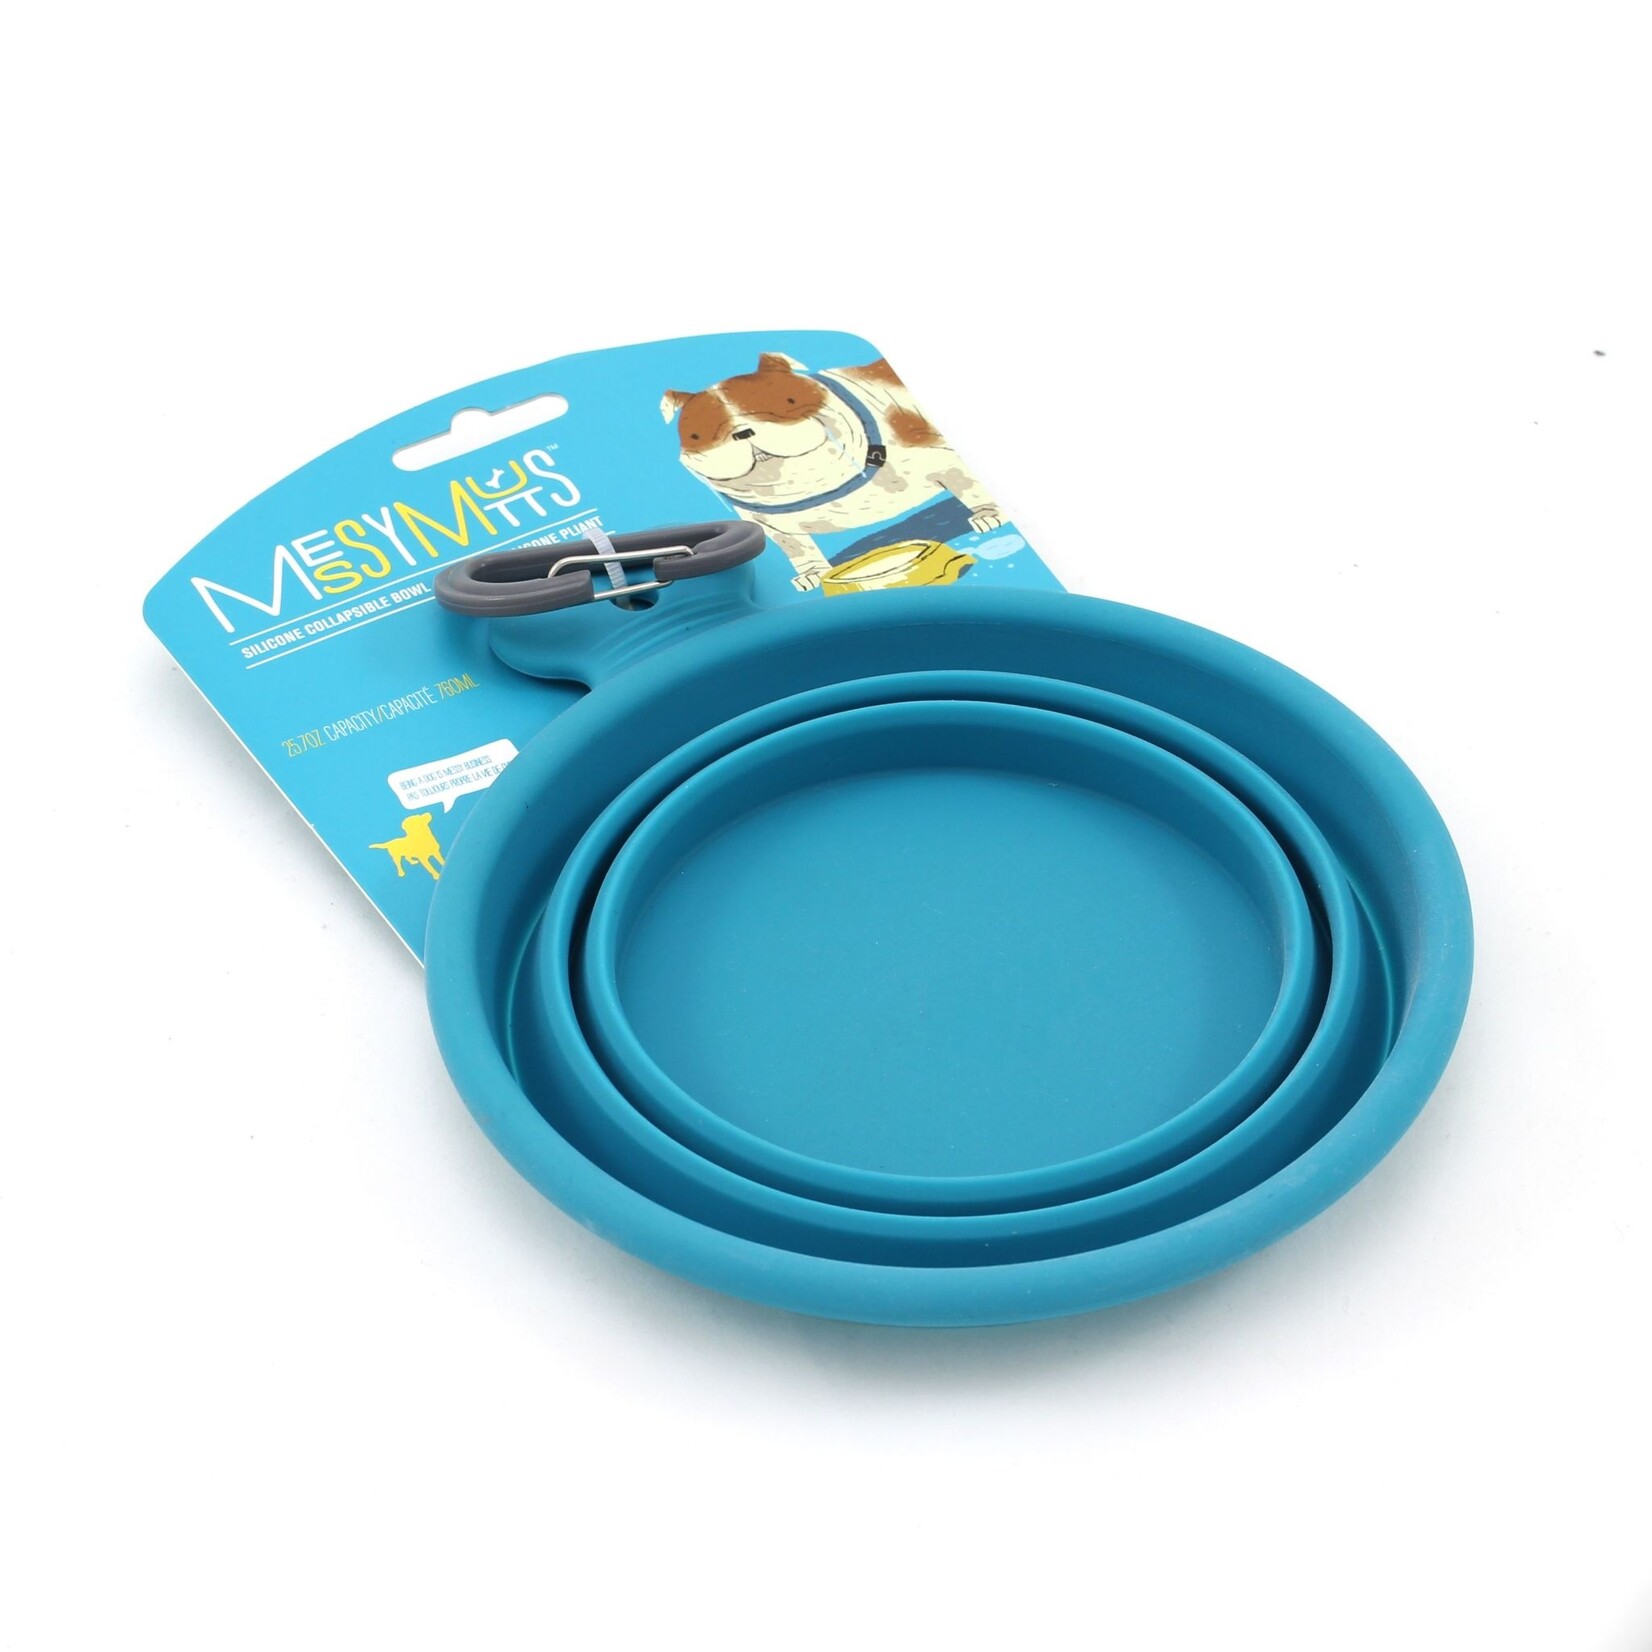 MESSY MUTTS Messy Mutts Bol En Silicone Rétractable, 1,75 Tasses - Bleu